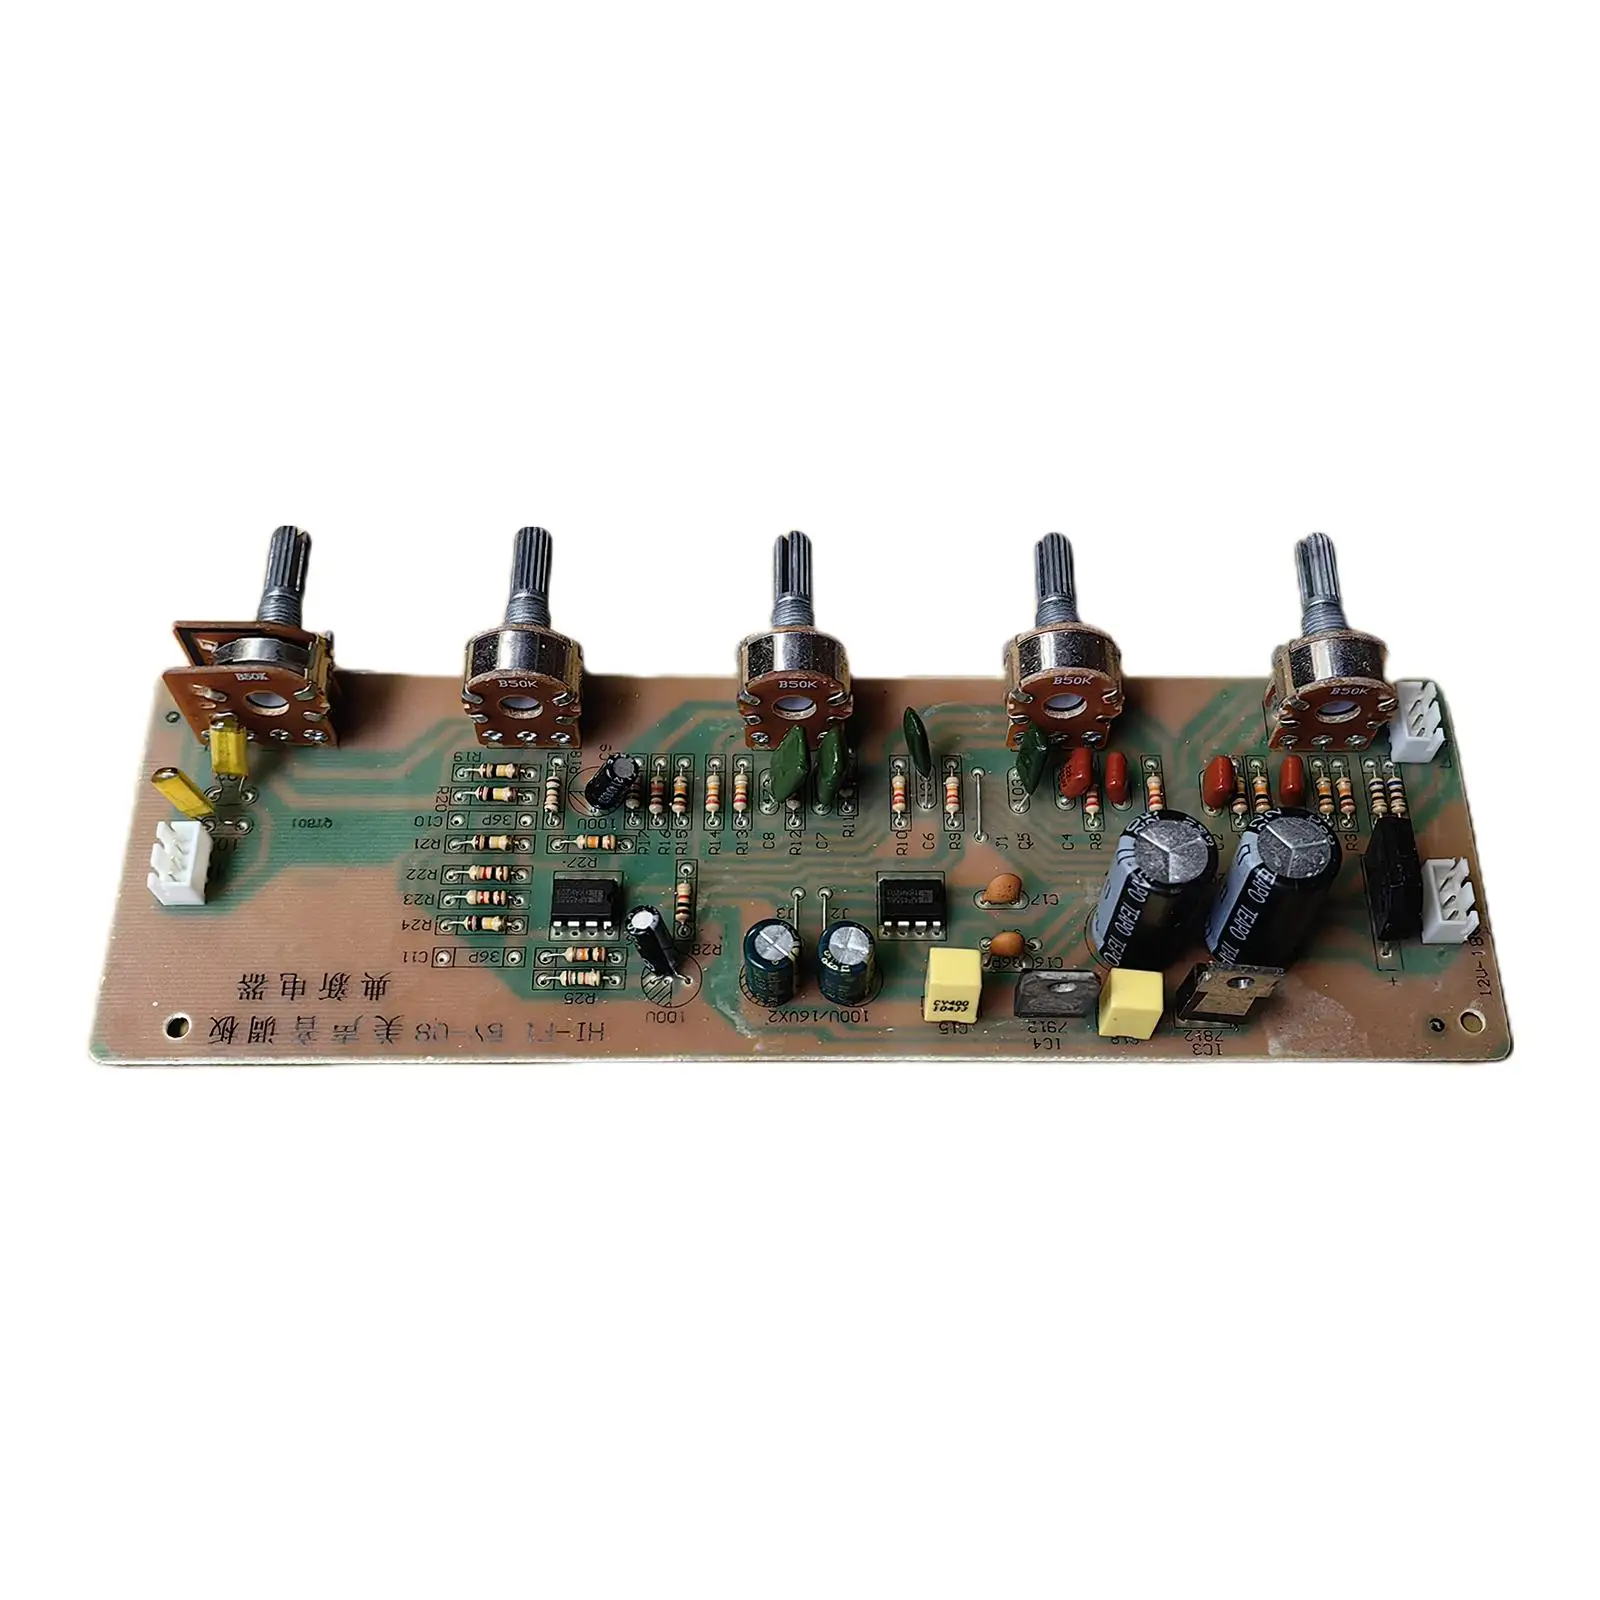 BY08 Stereo Audio Power Amplifier Control Board